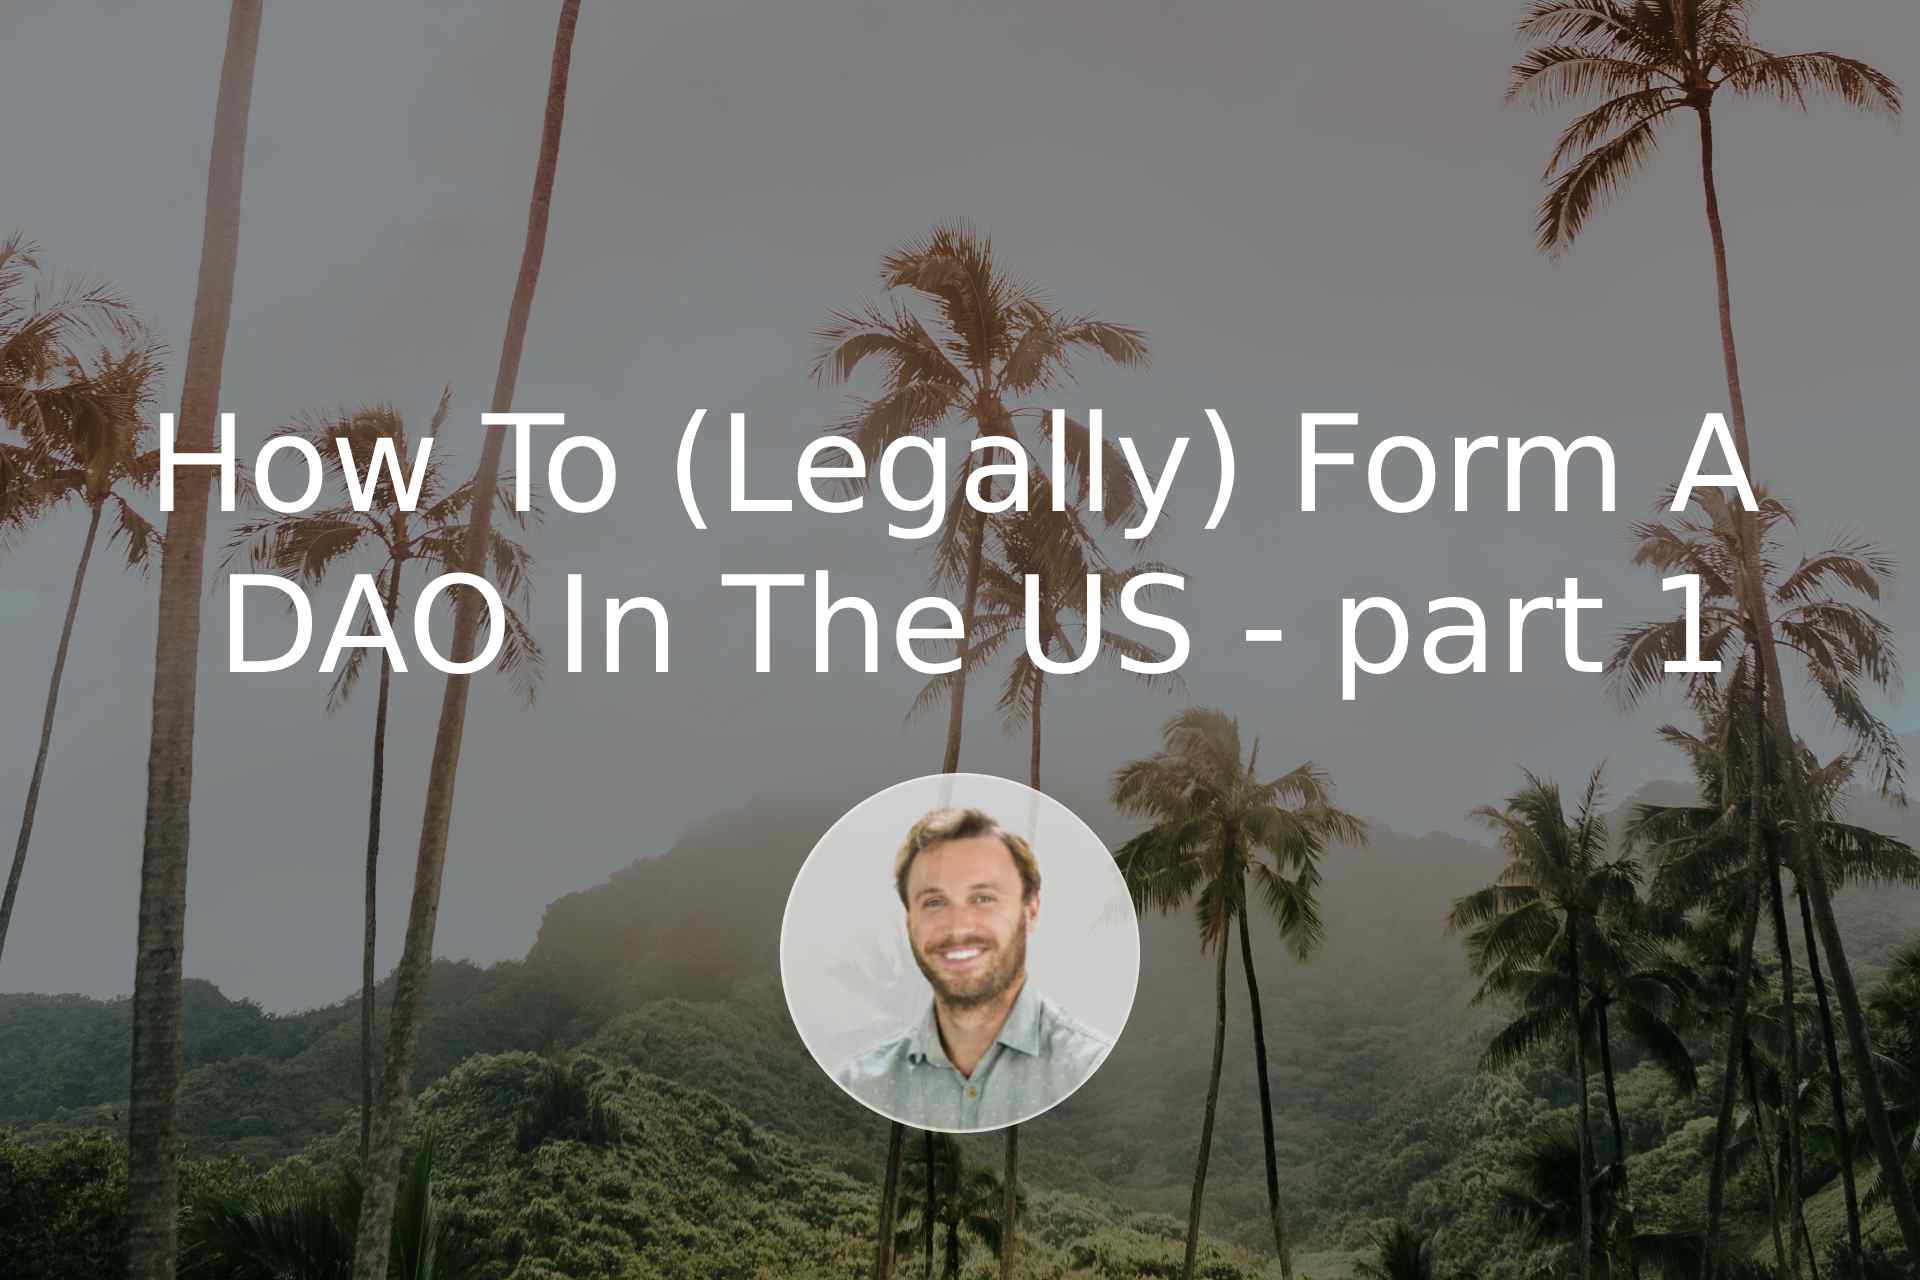 How To (Legally) Form A DAO In The US - part 1